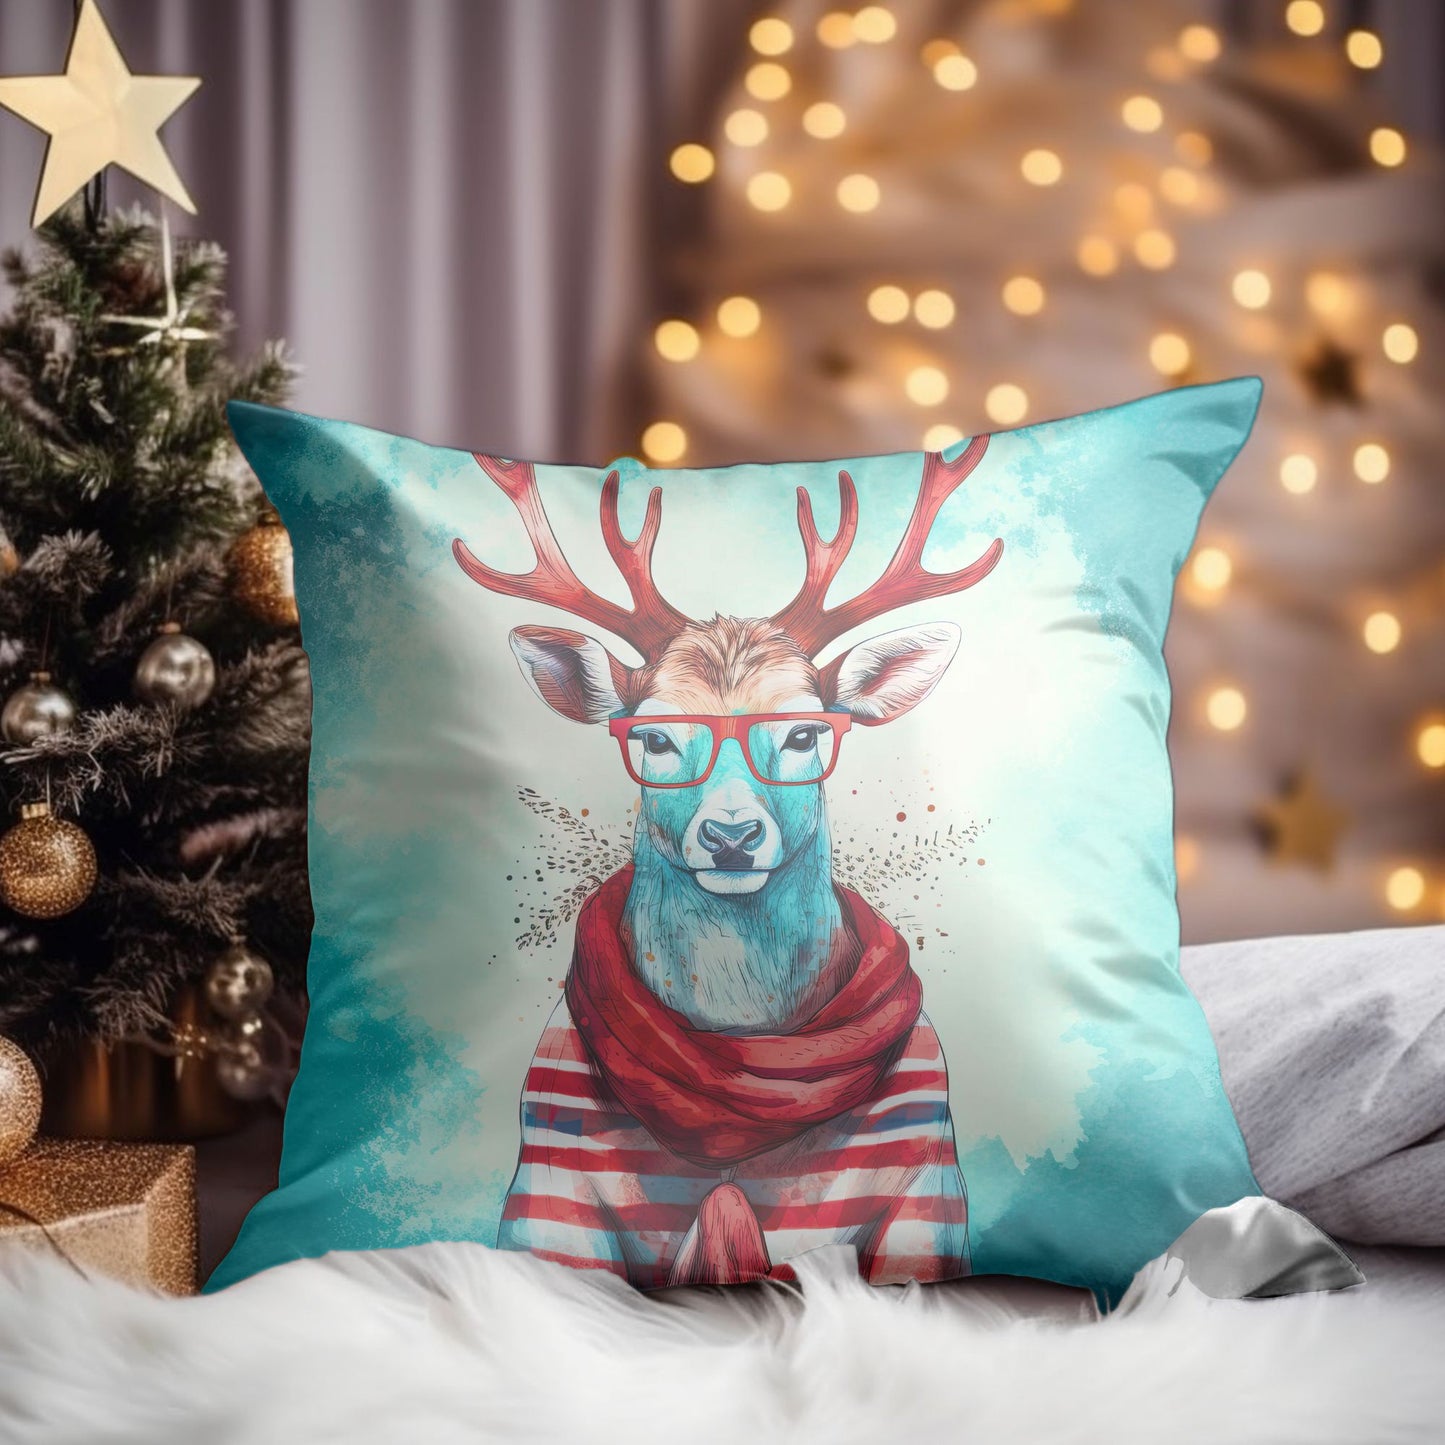 Deer Design Pillow Cover in a Cozy Setting